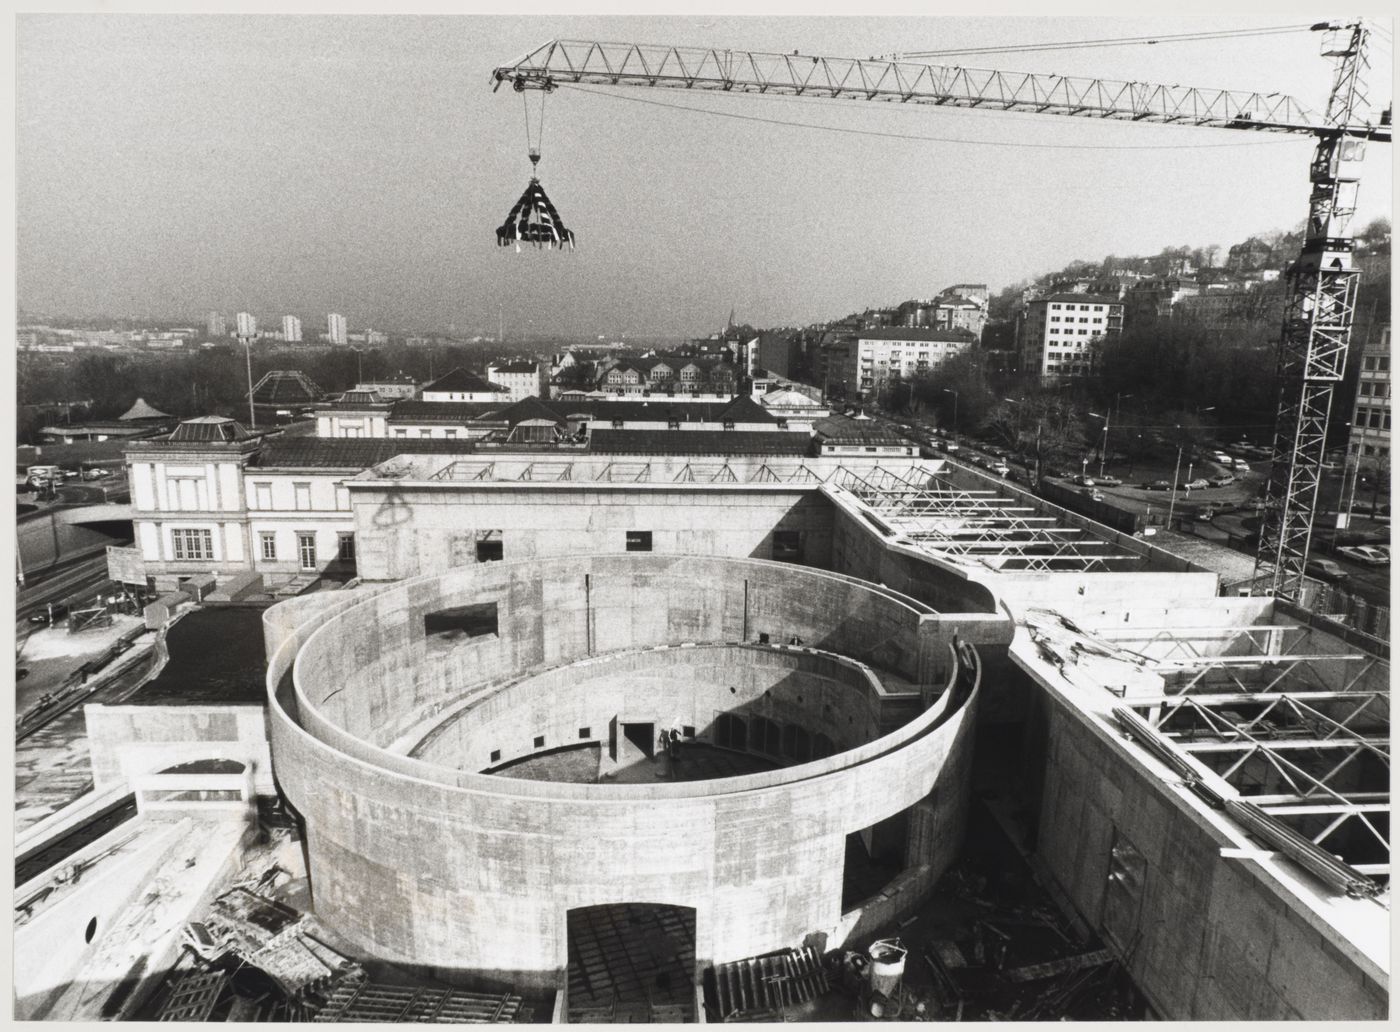 Staatsgalerie, Stuttgart, Germany: topping out ceremony